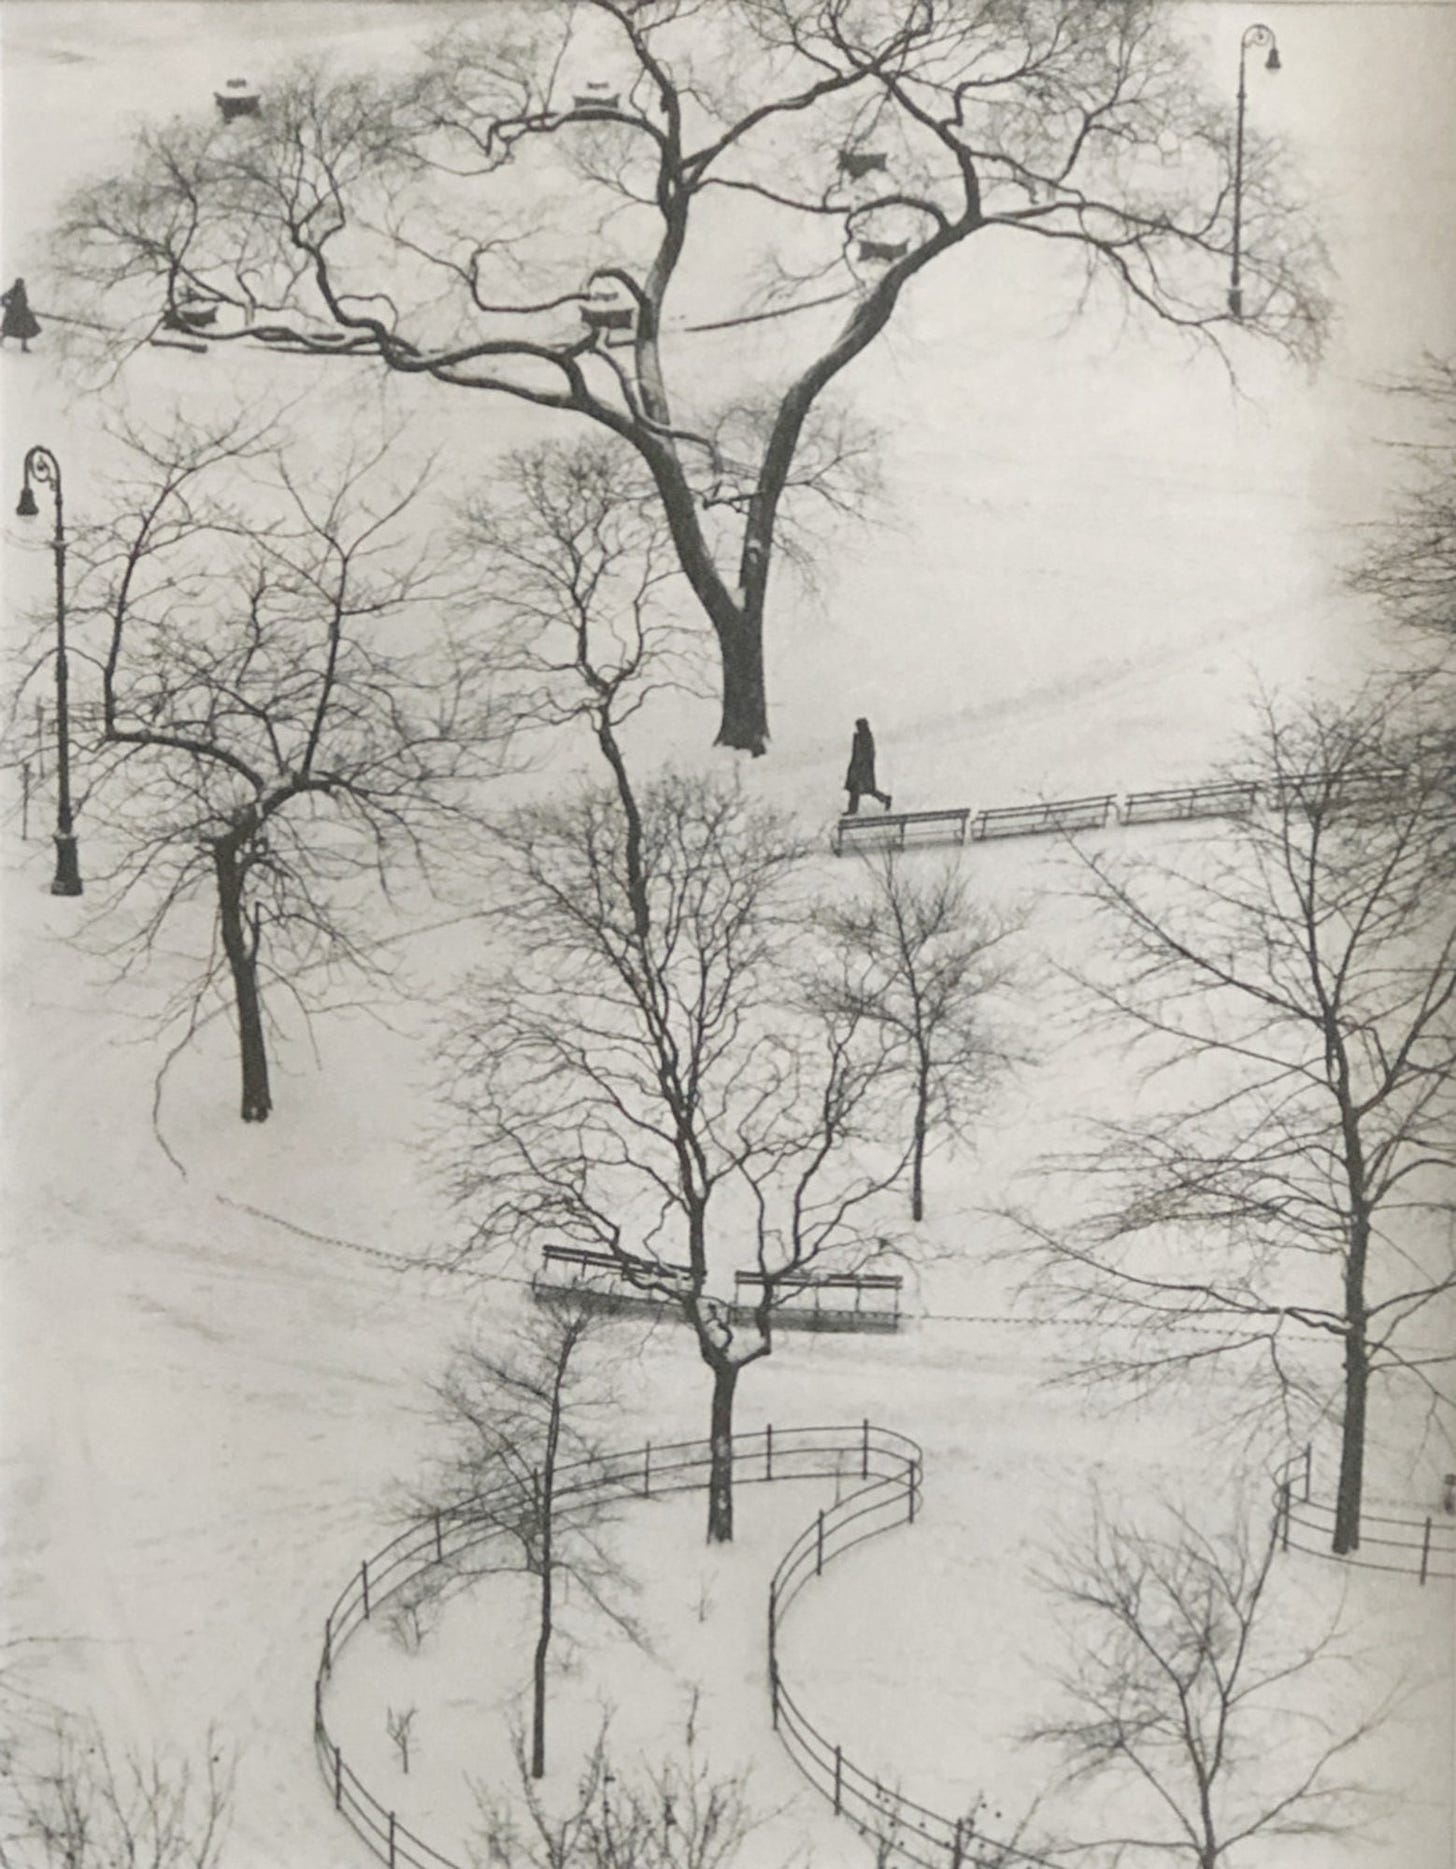 an aerial photograph of snow-covered Washington Square Park, New York City, 1954